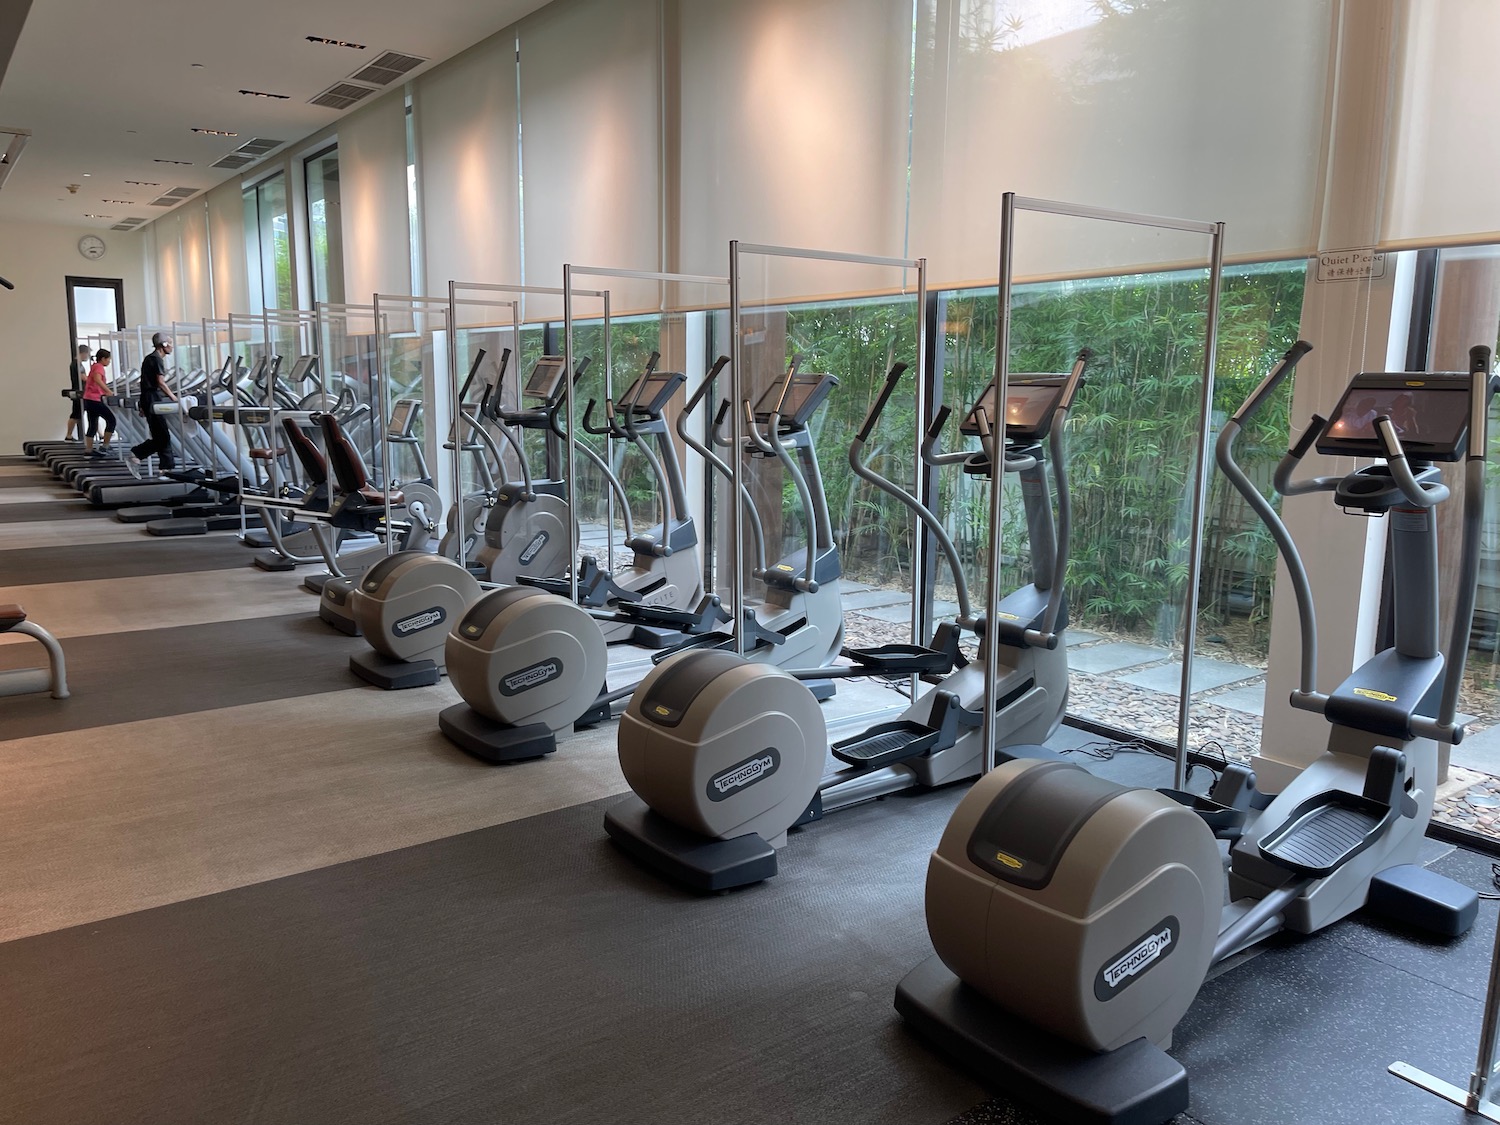 a group of exercise machines in a room